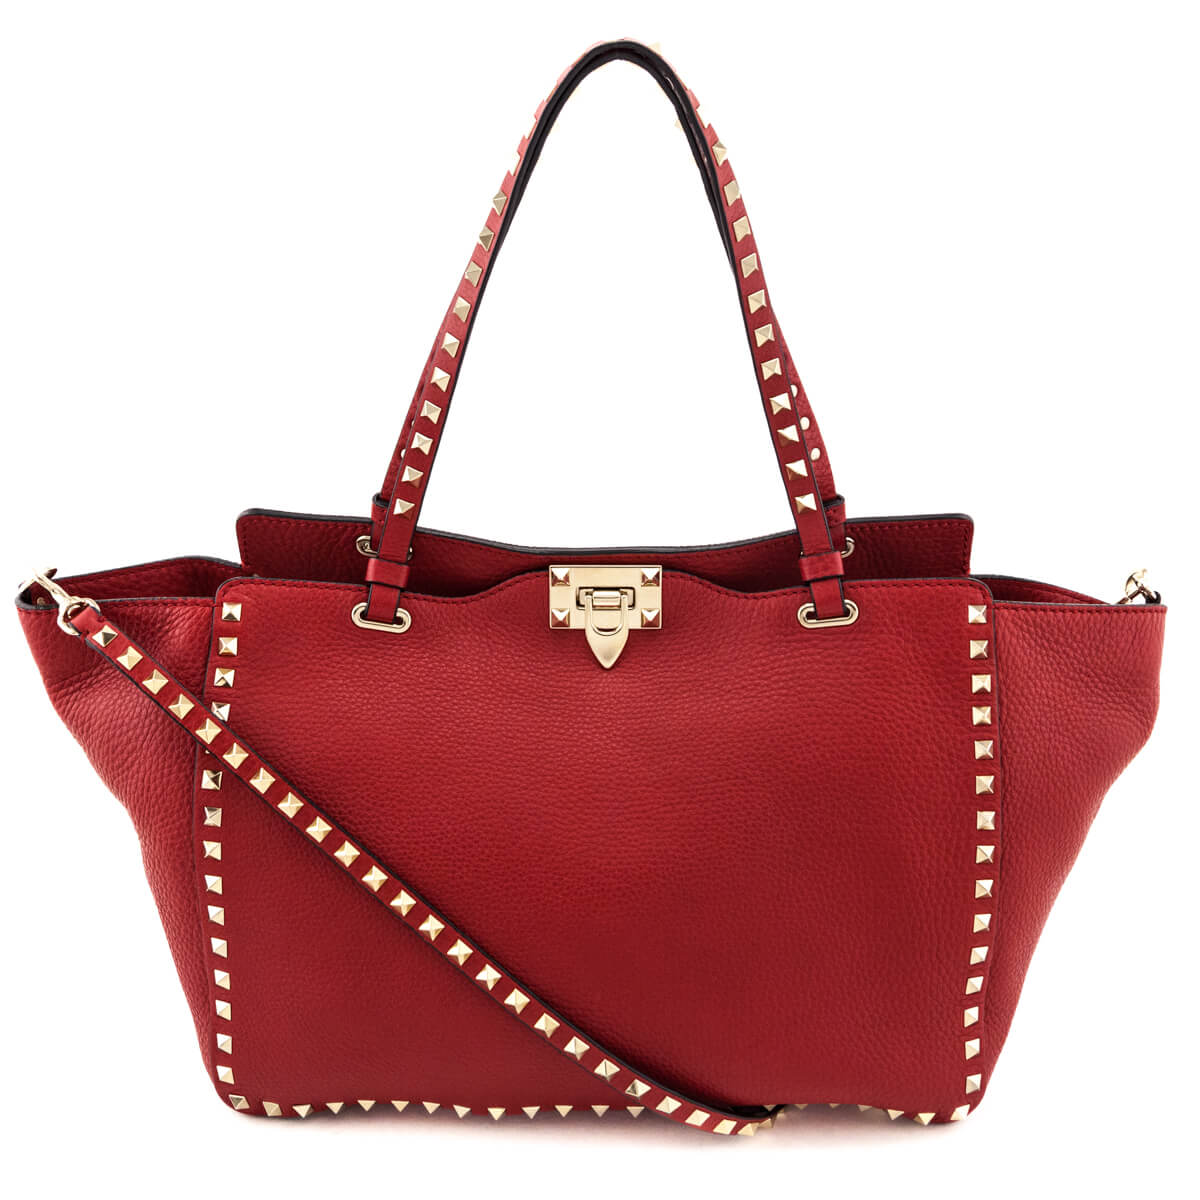 Valentino Red Grained Calfskin Medium Rockstud Tote - Love that Bag etc - Preowned Authentic Designer Handbags & Preloved Fashions